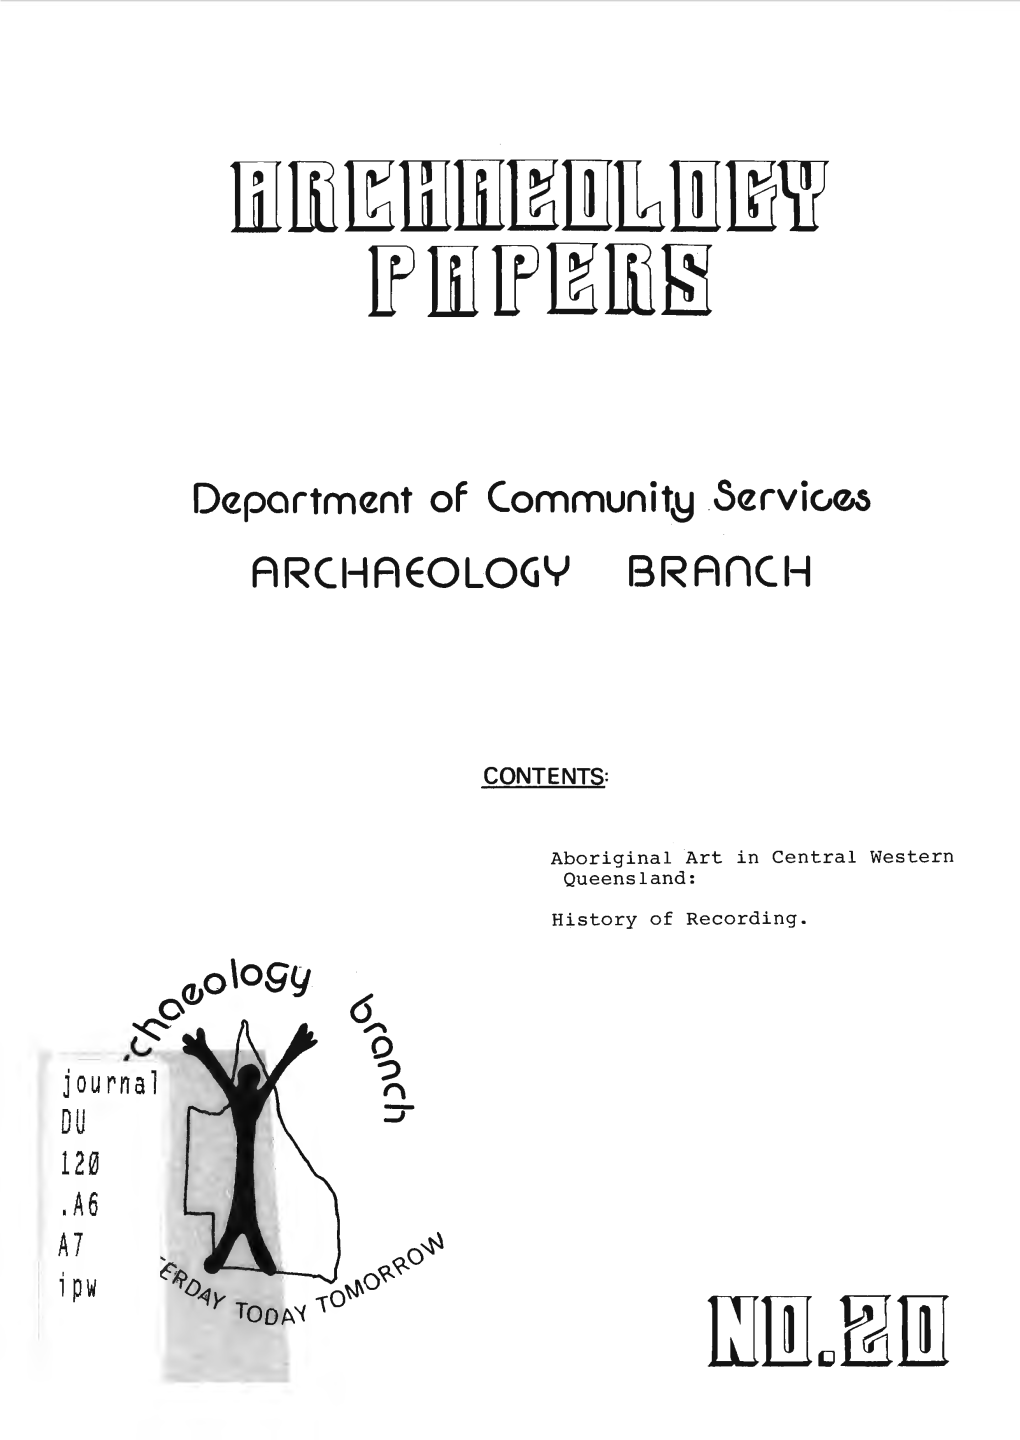 ARCHAEOLOGY Branch